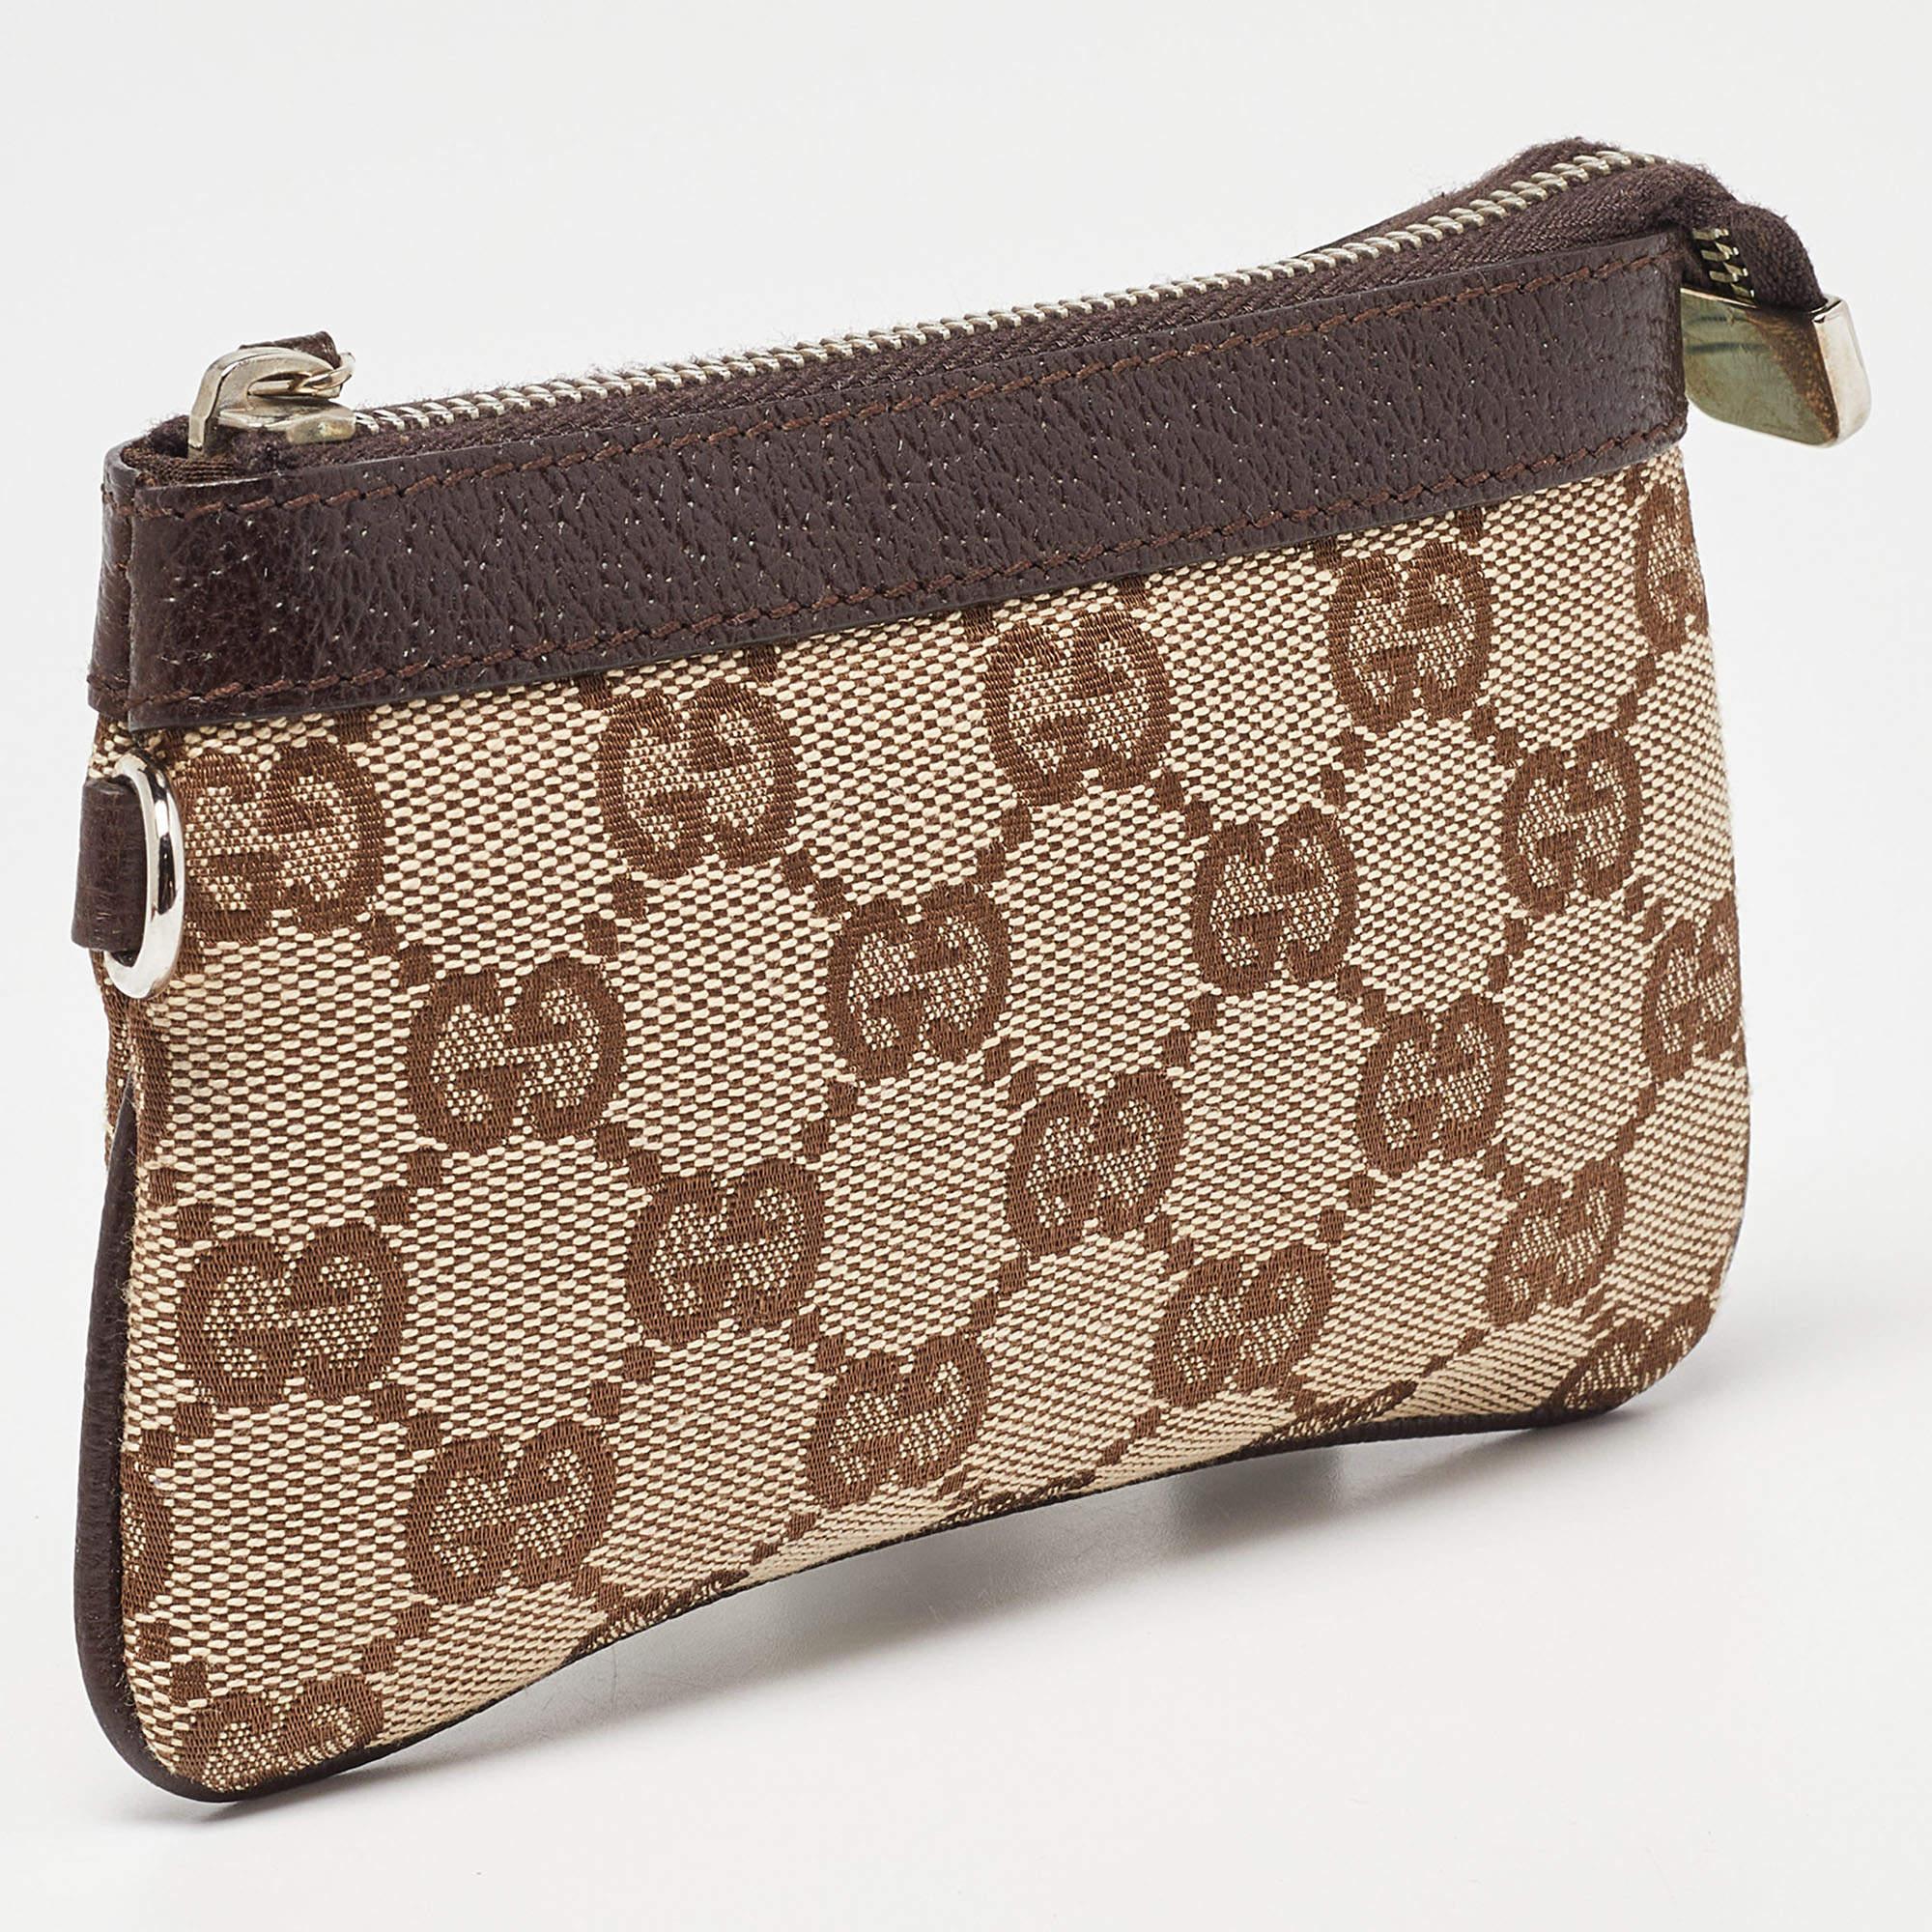 Gucci Beige/Brown GG Canvas and Leather Zip Pouch In Excellent Condition For Sale In Dubai, Al Qouz 2